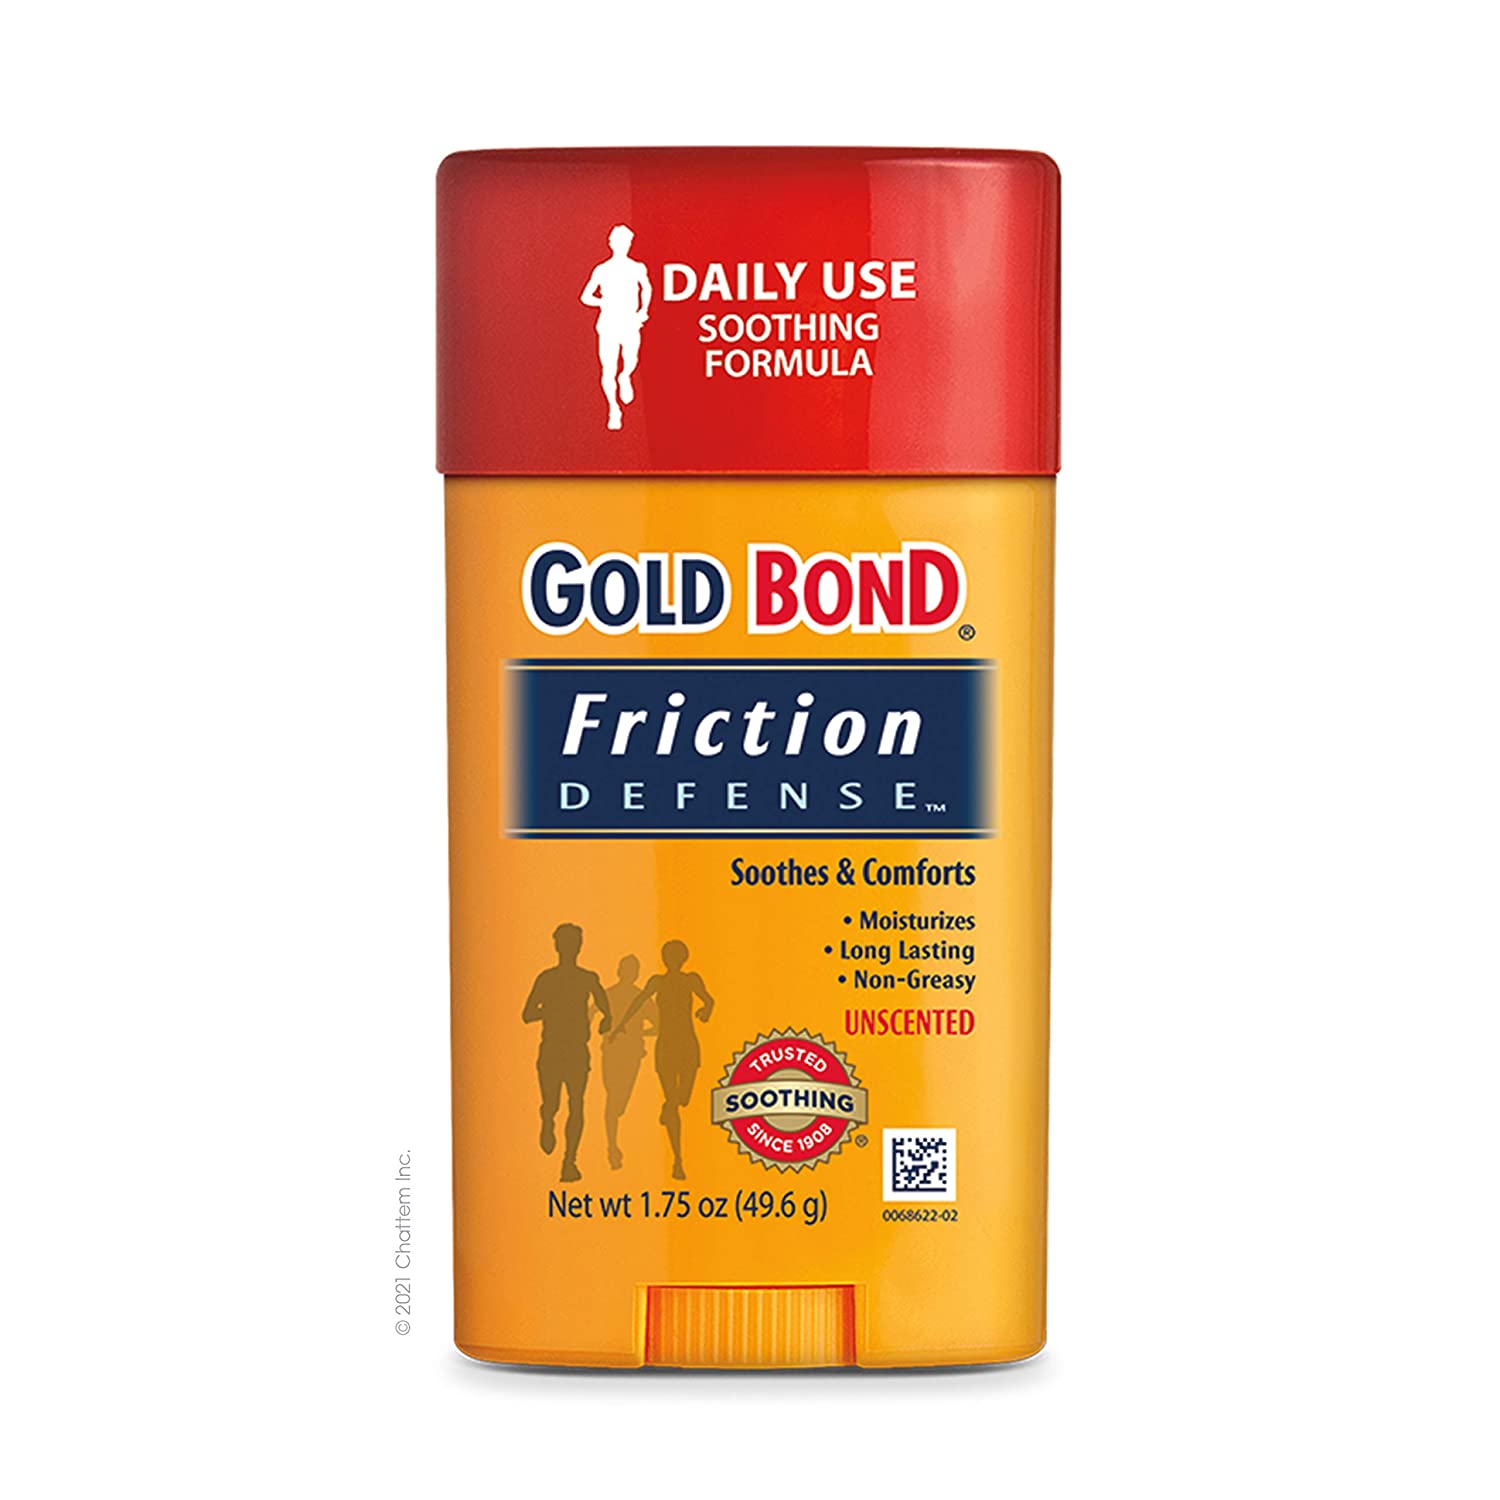 Gold Bond Friction Defense Stick chafing relief